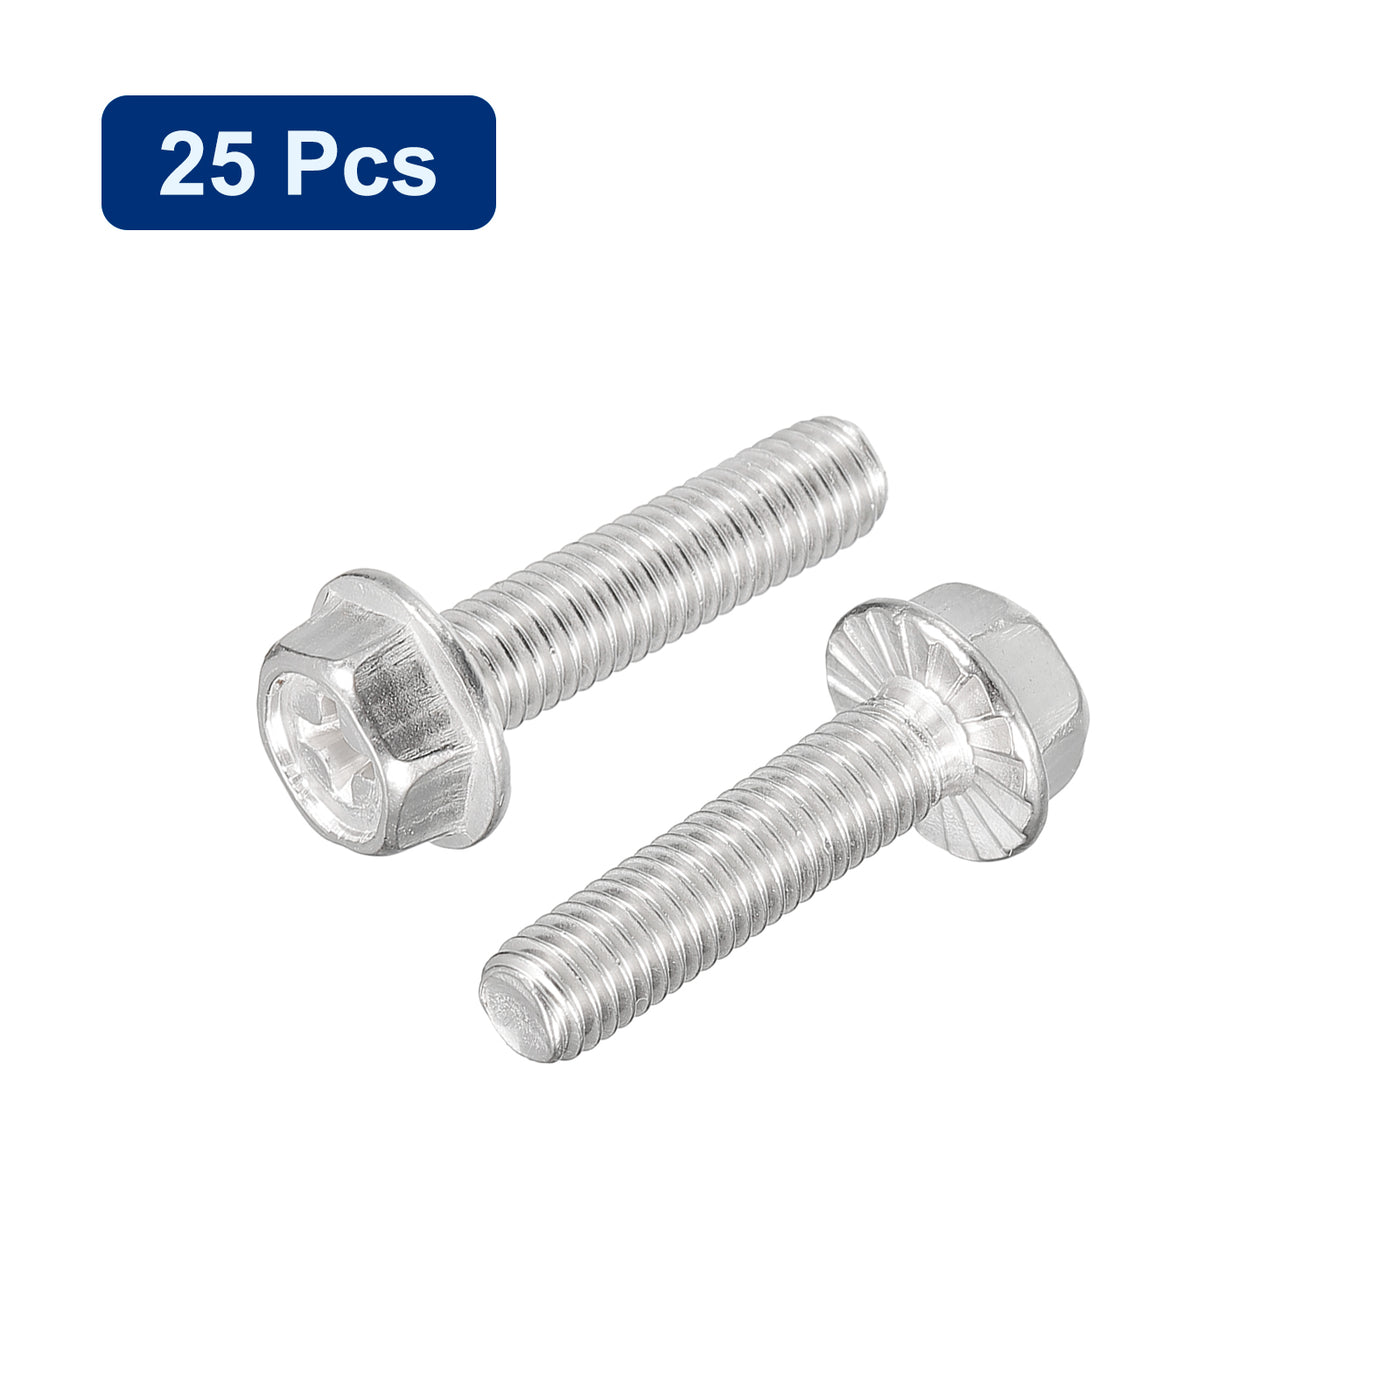 uxcell Uxcell M5x25mm Phillips Hex Head Flange Bolts, 25pcs 304 Stainless Steel Screws